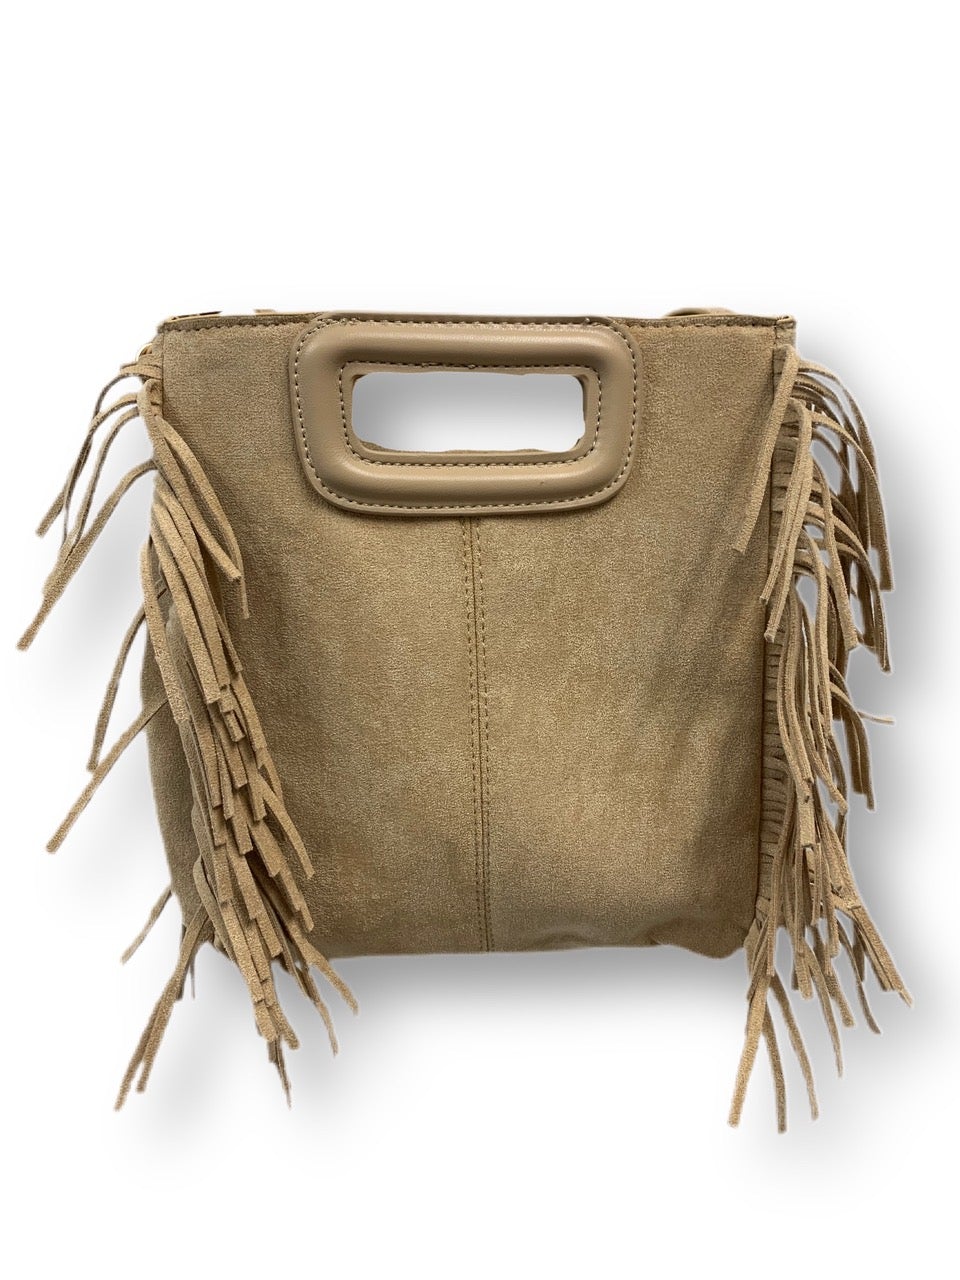 Small Suede Bag with Fringe